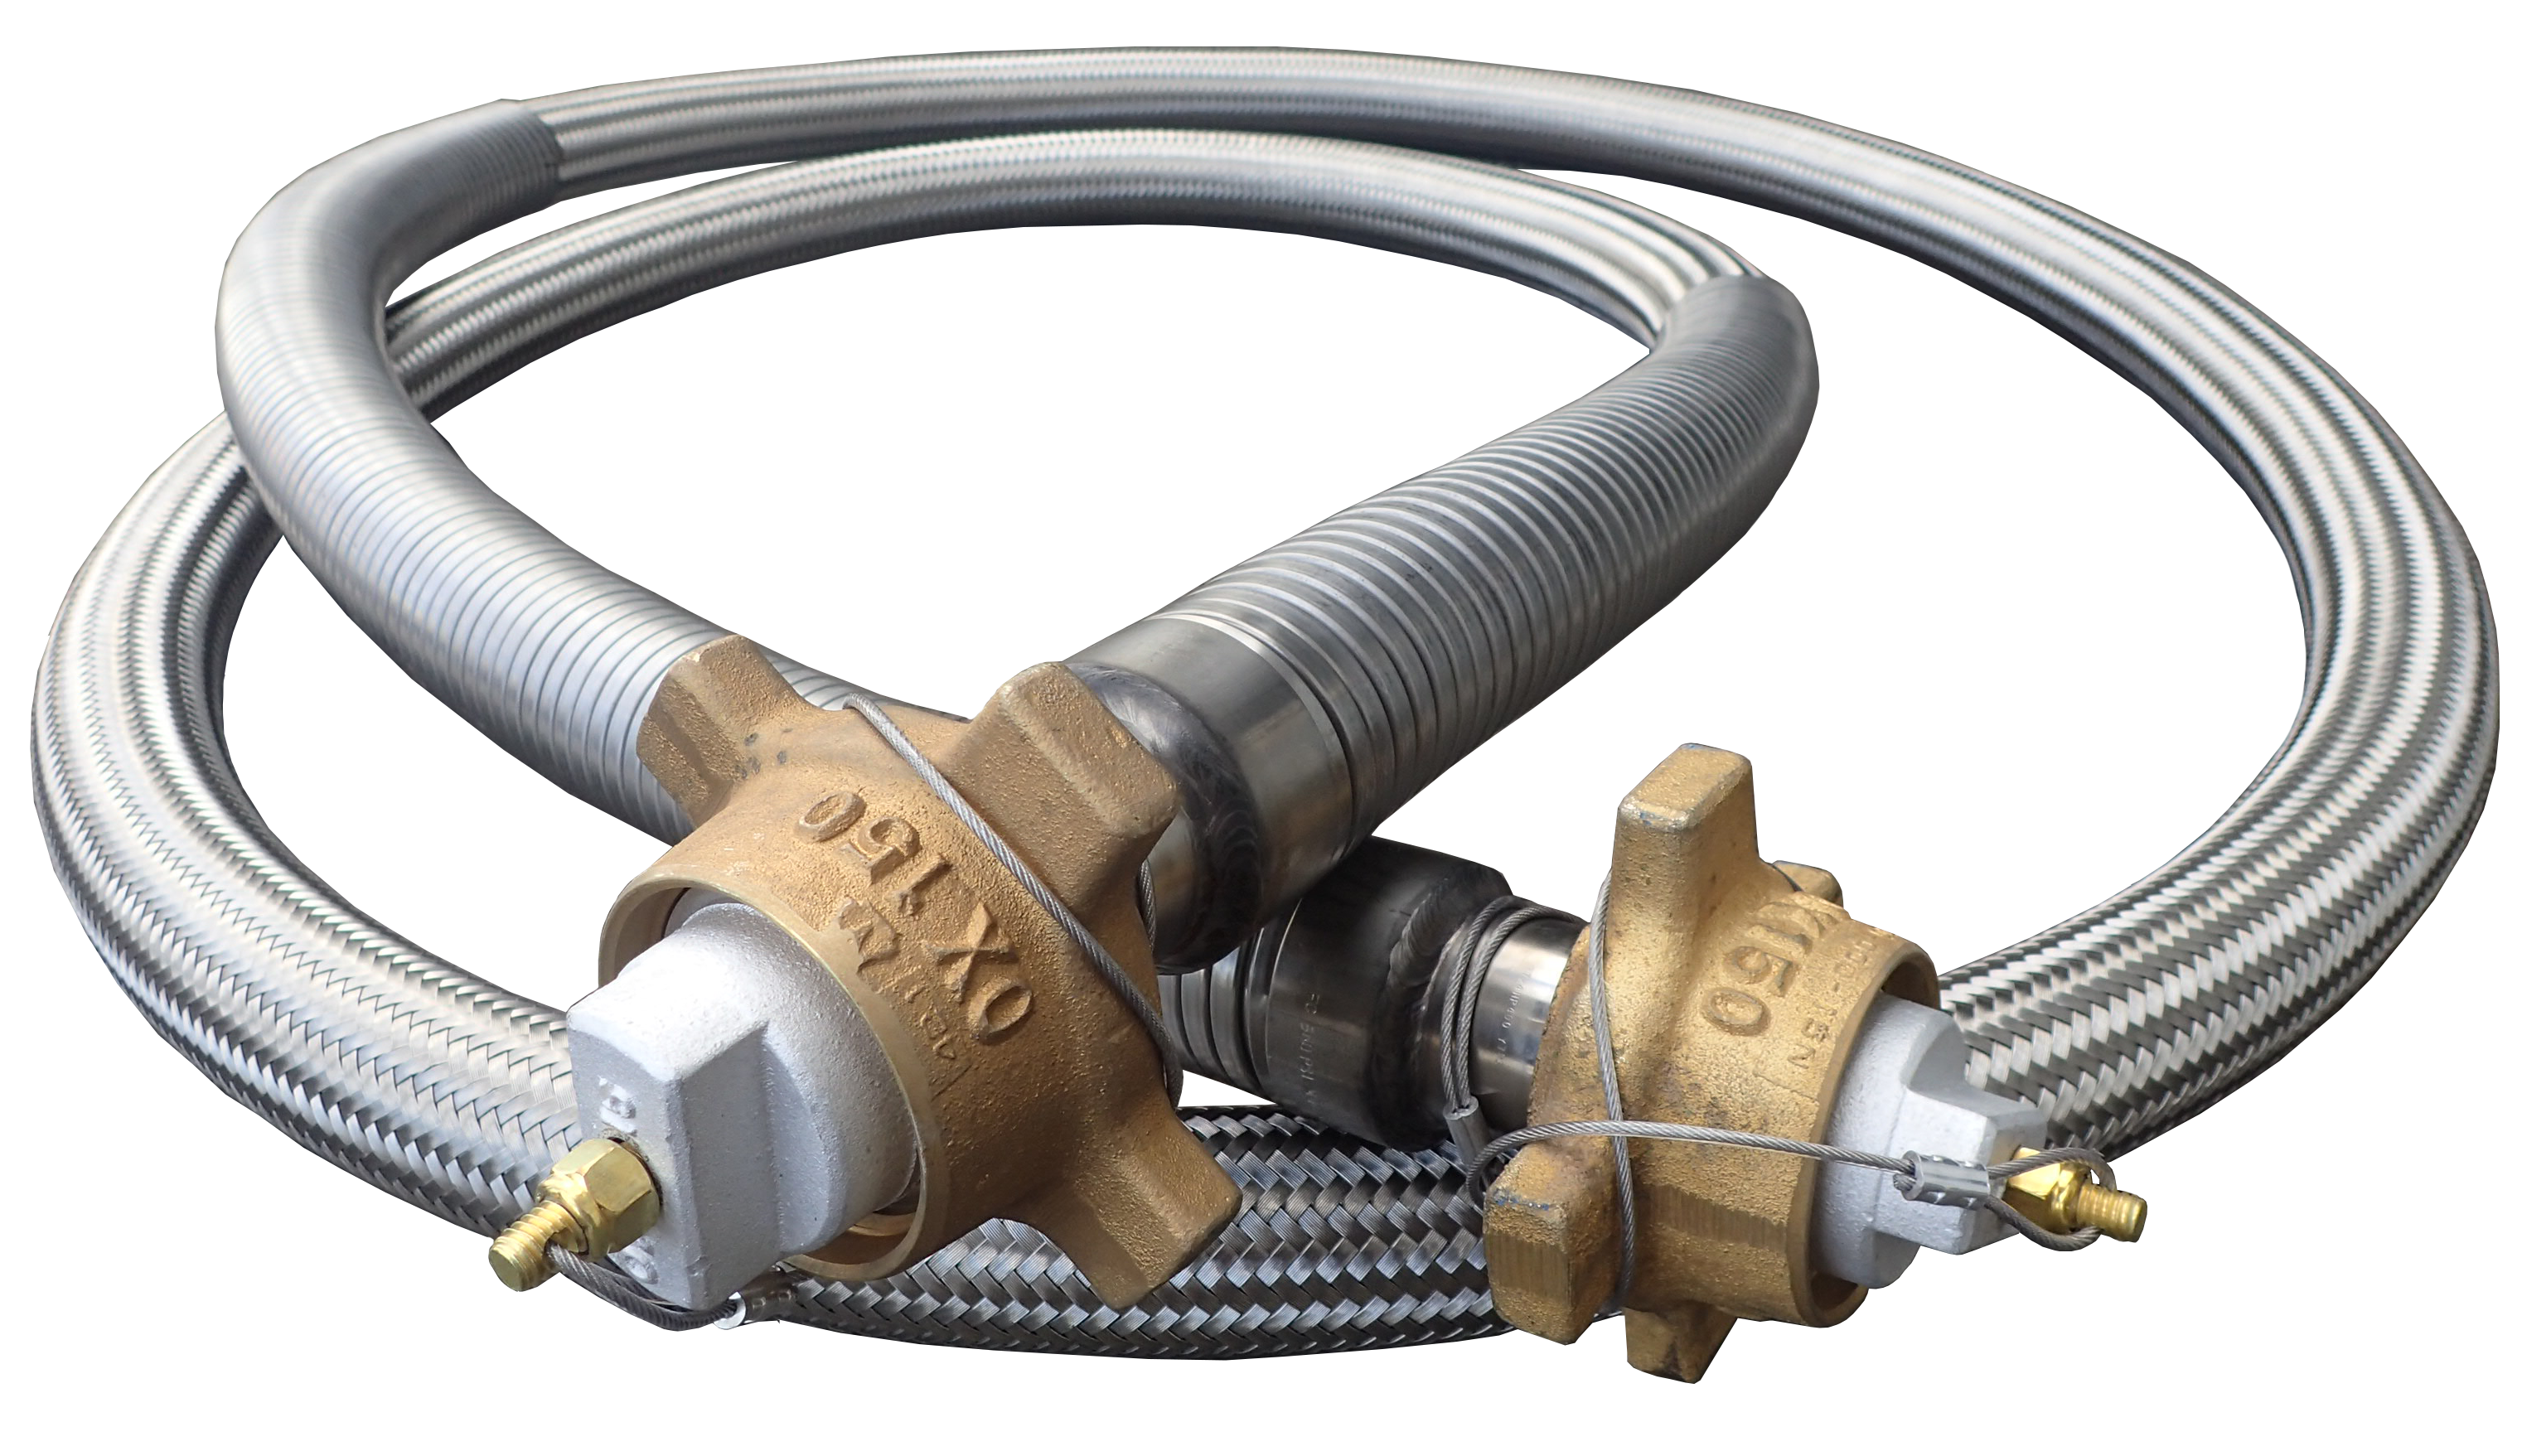 Hoses, Piping & Accessories (non-Jacketed) products